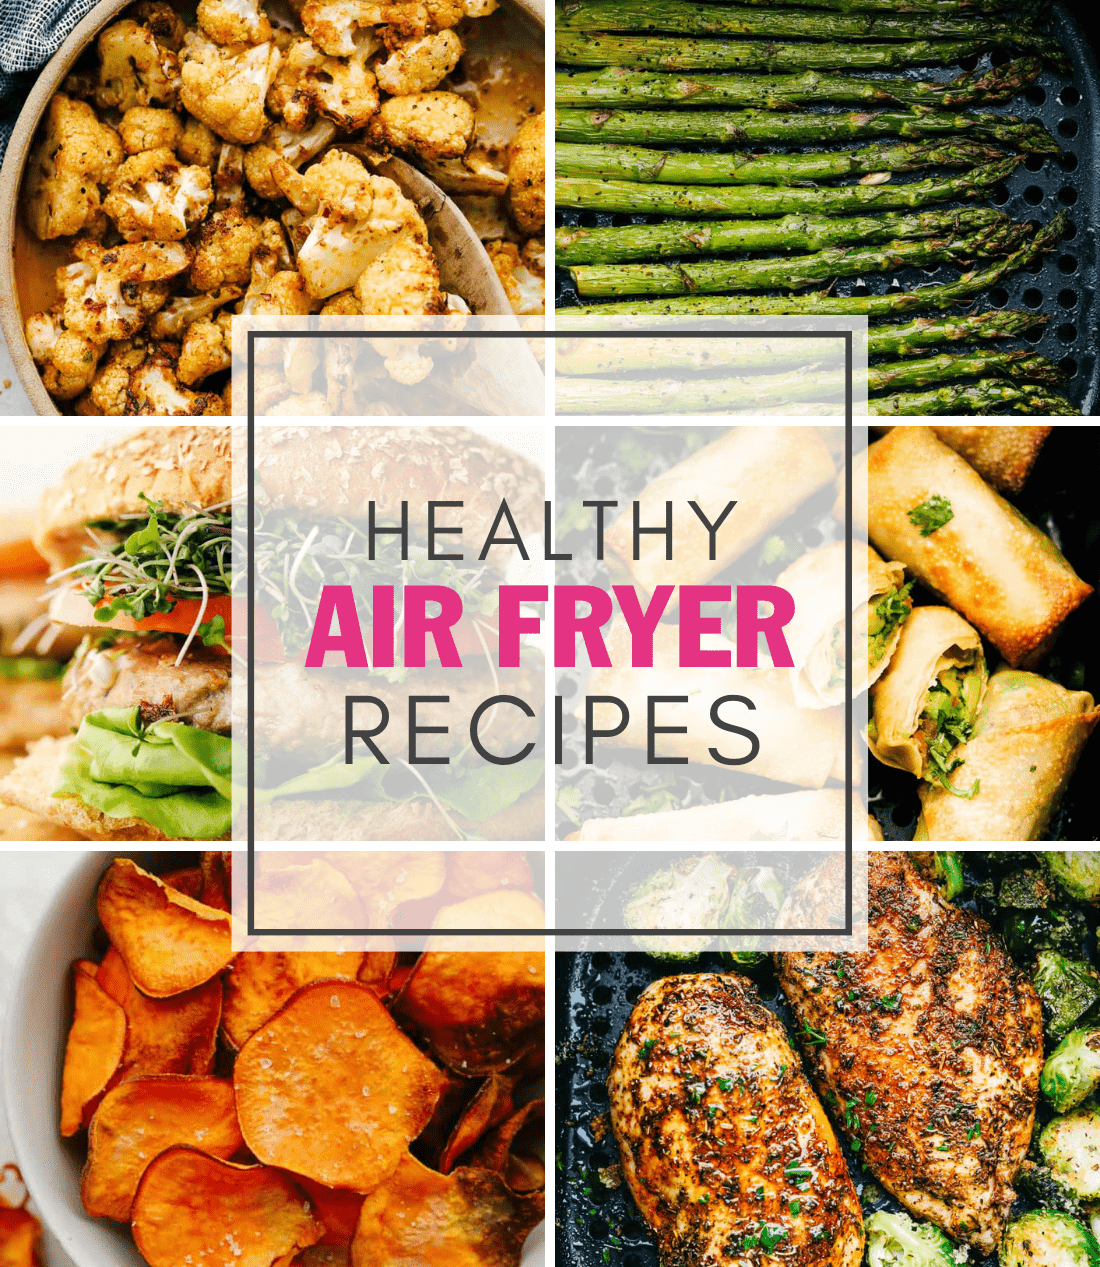 Healthy Air Fryer Recipes Roundup | The Recipe Critic